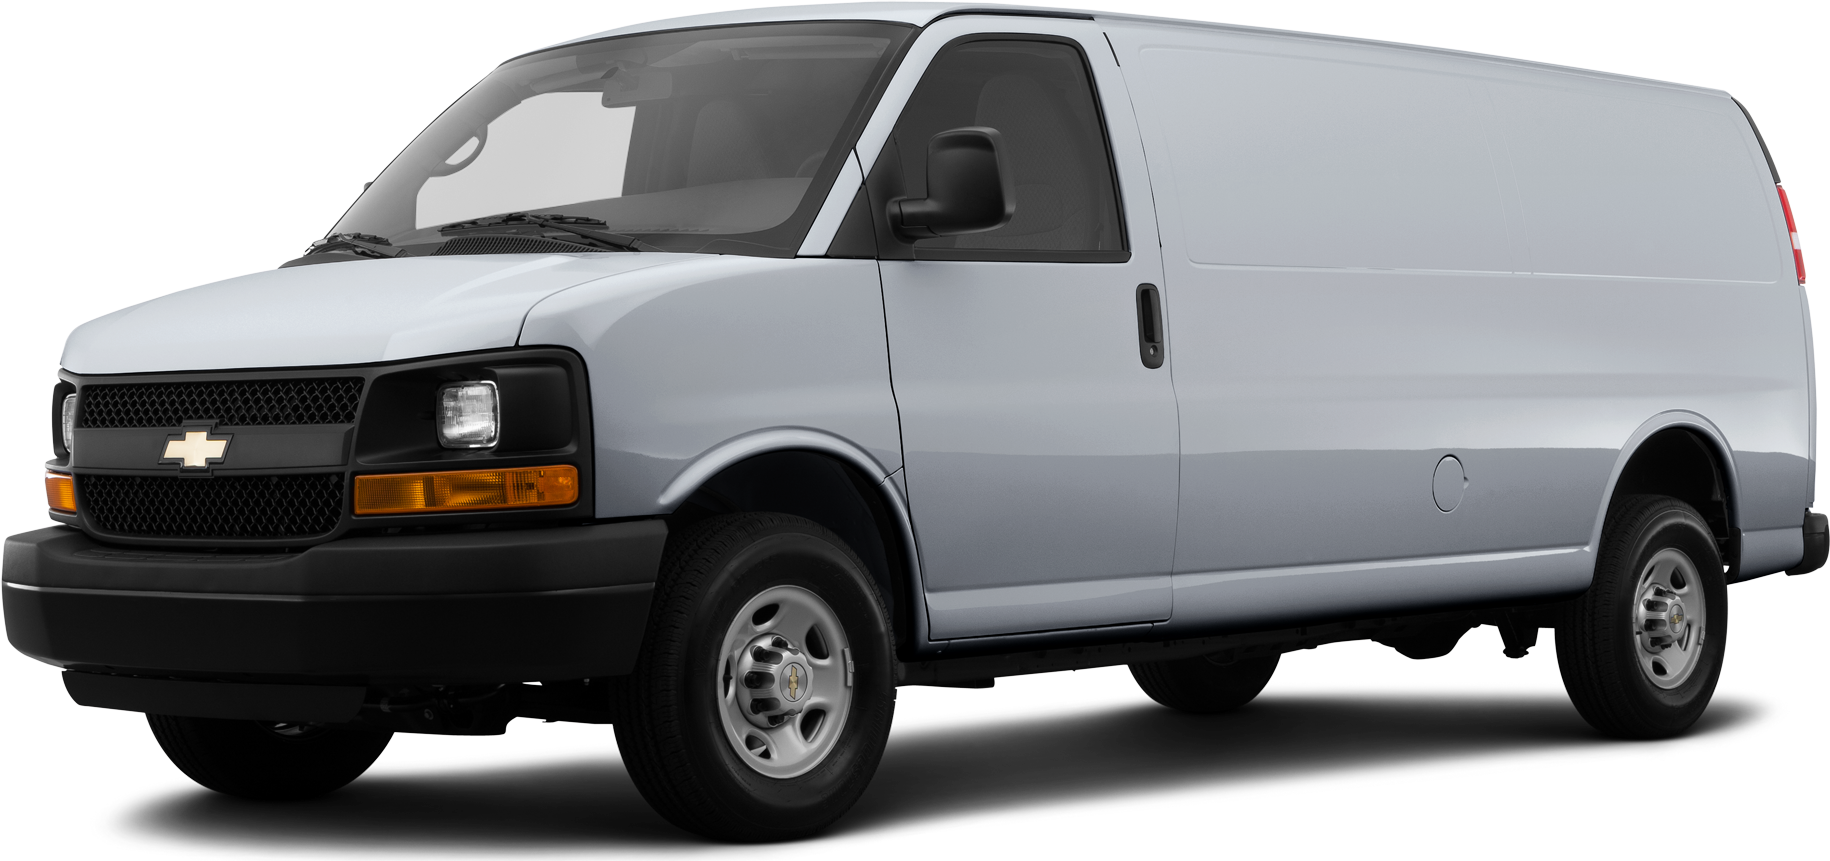 2014 Chevy Express 2500 Cargo Values & Cars for Sale | Kelley Blue Book